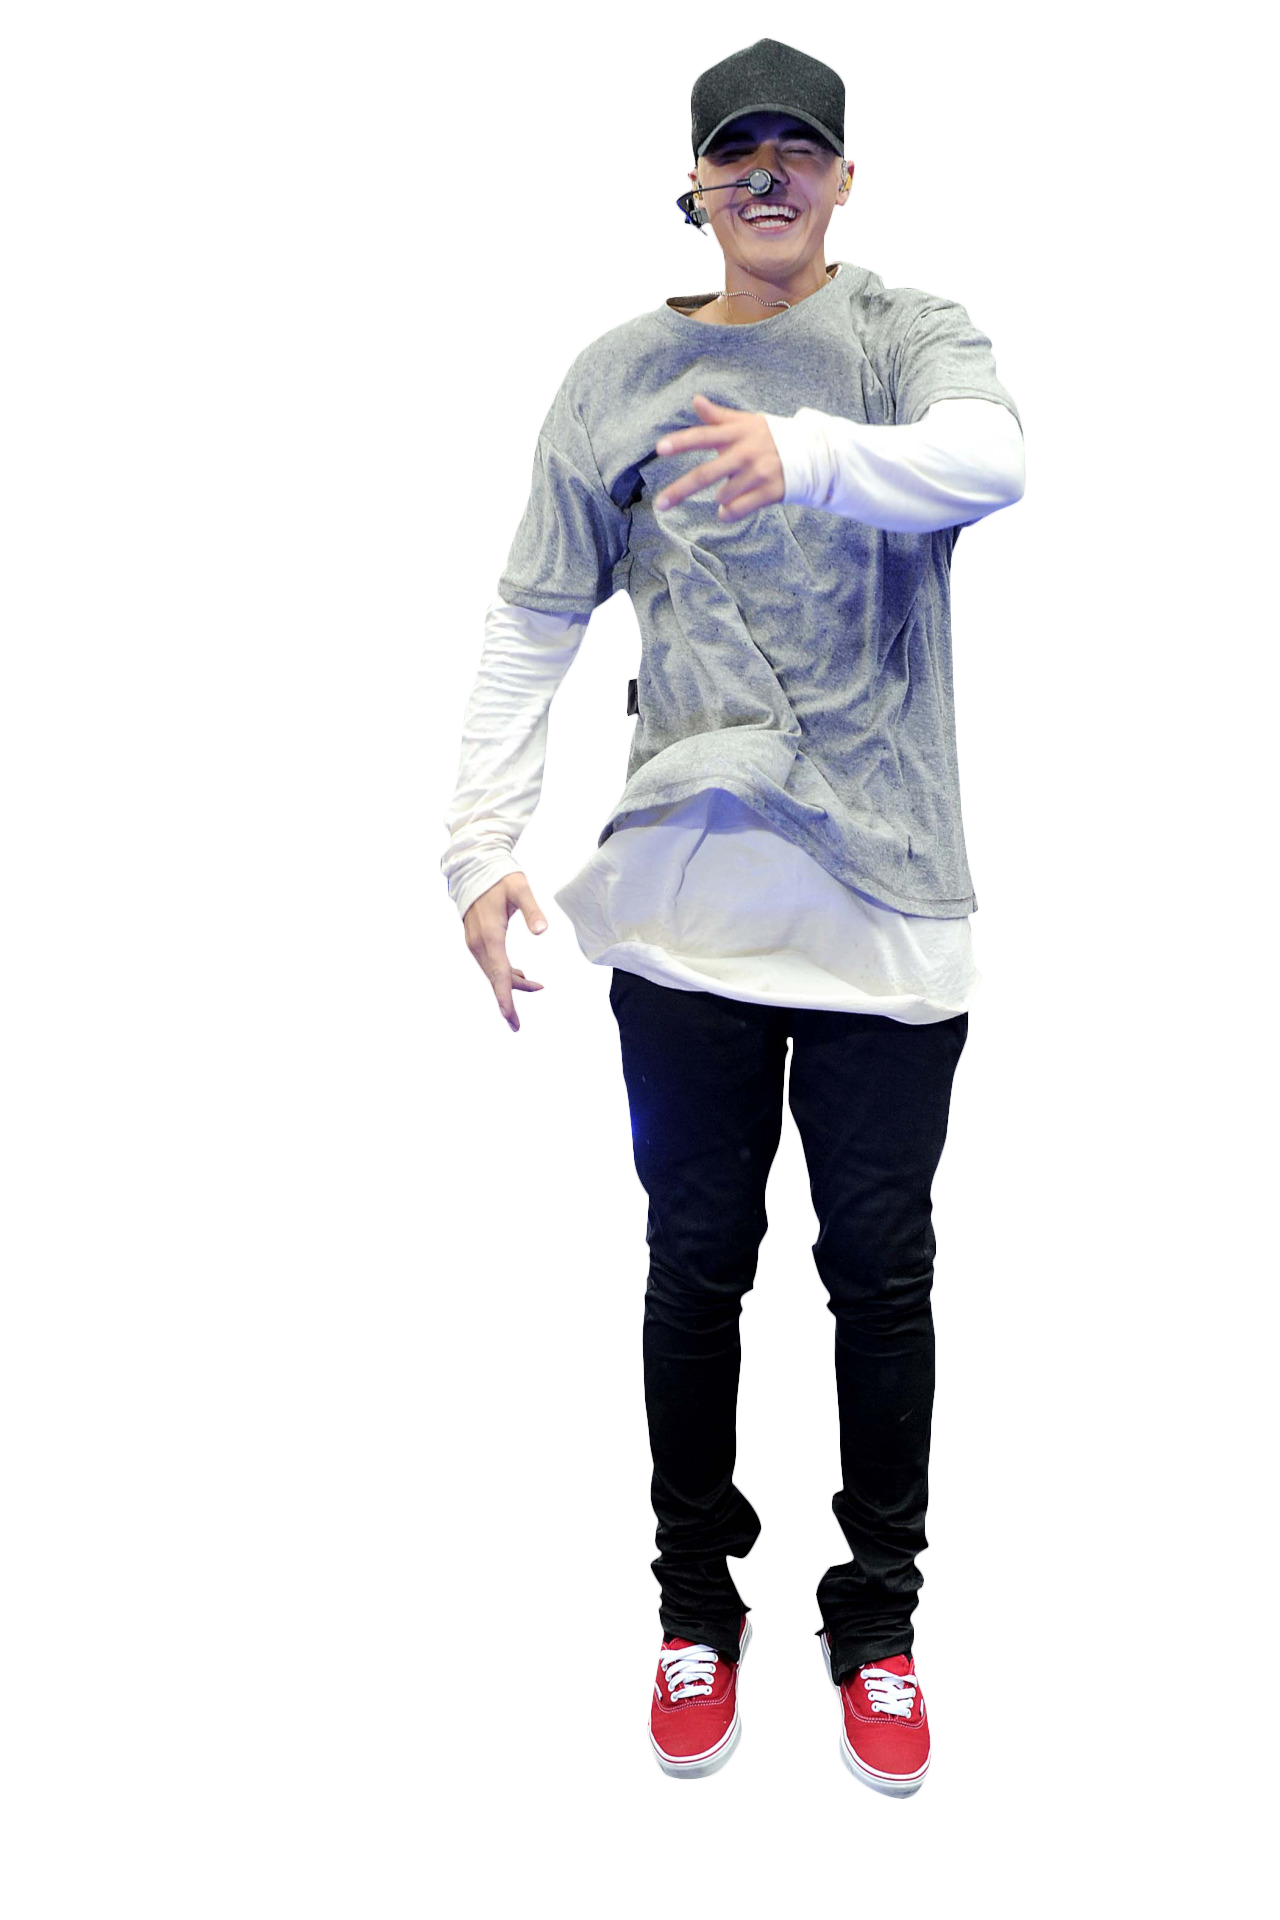 Justin Bieber Performing on Stage PNG Image